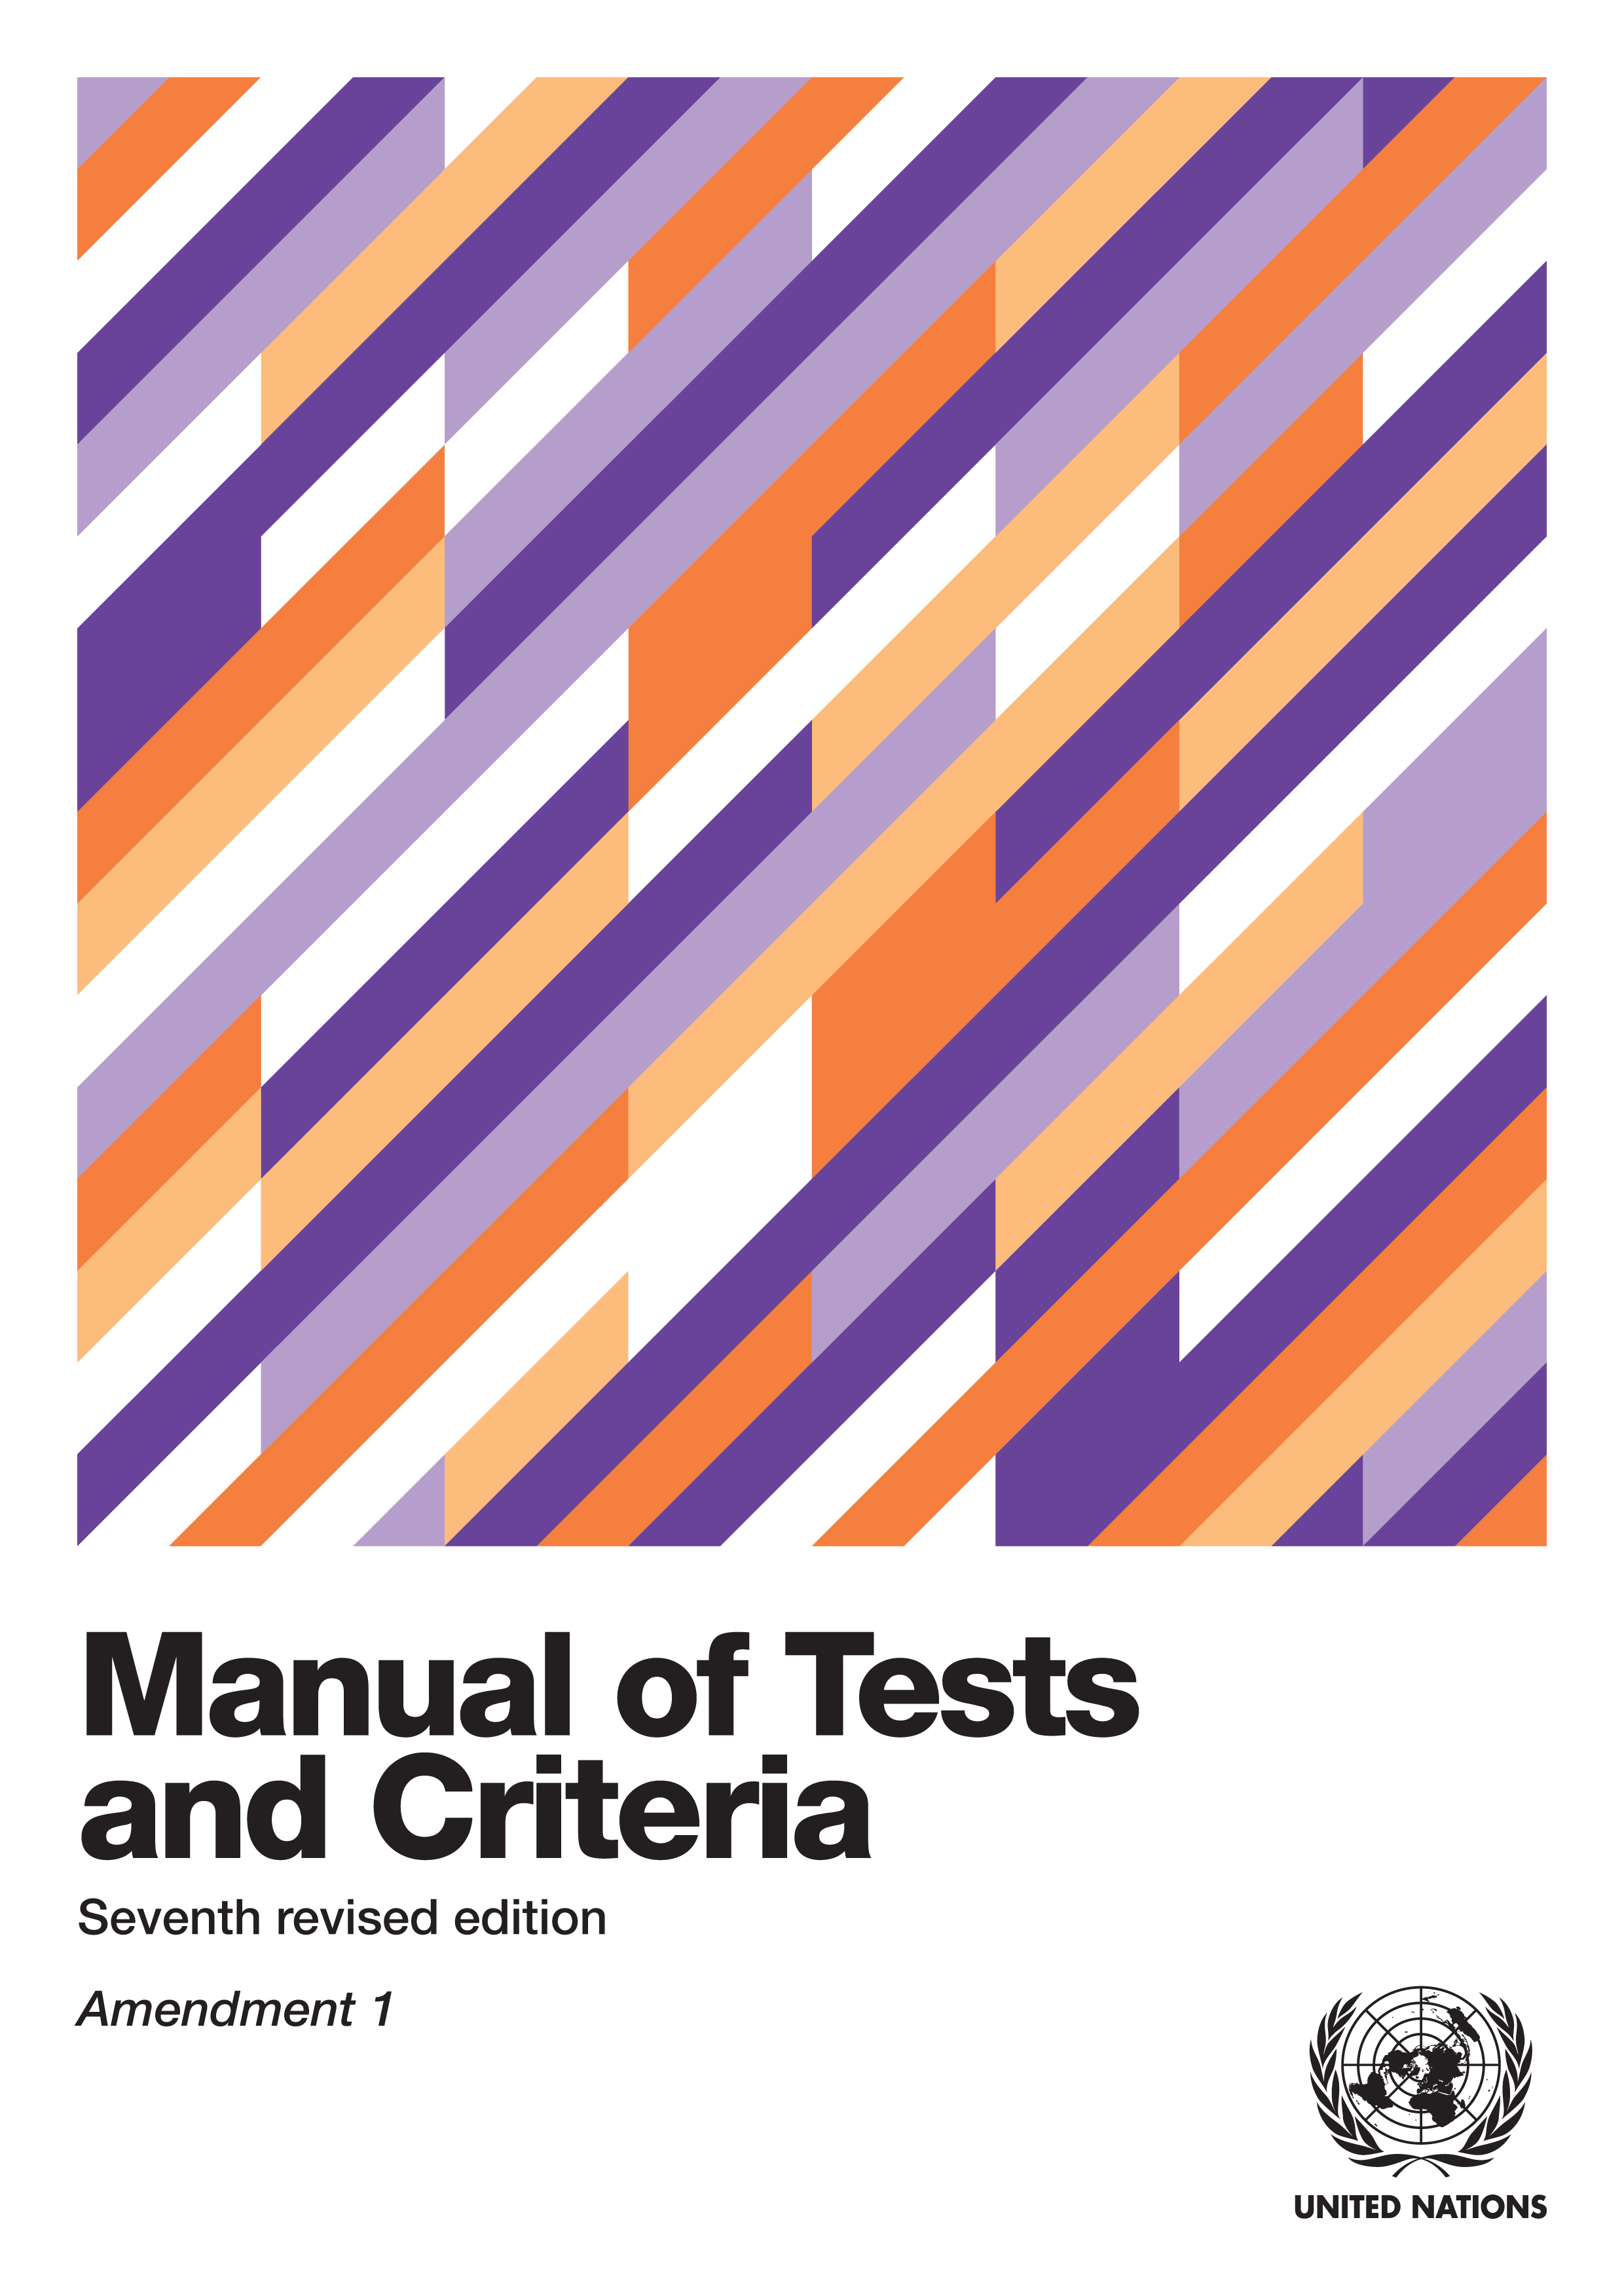 image of Manual of Tests and Criteria - Seventh Revised Edition, Amendment 1